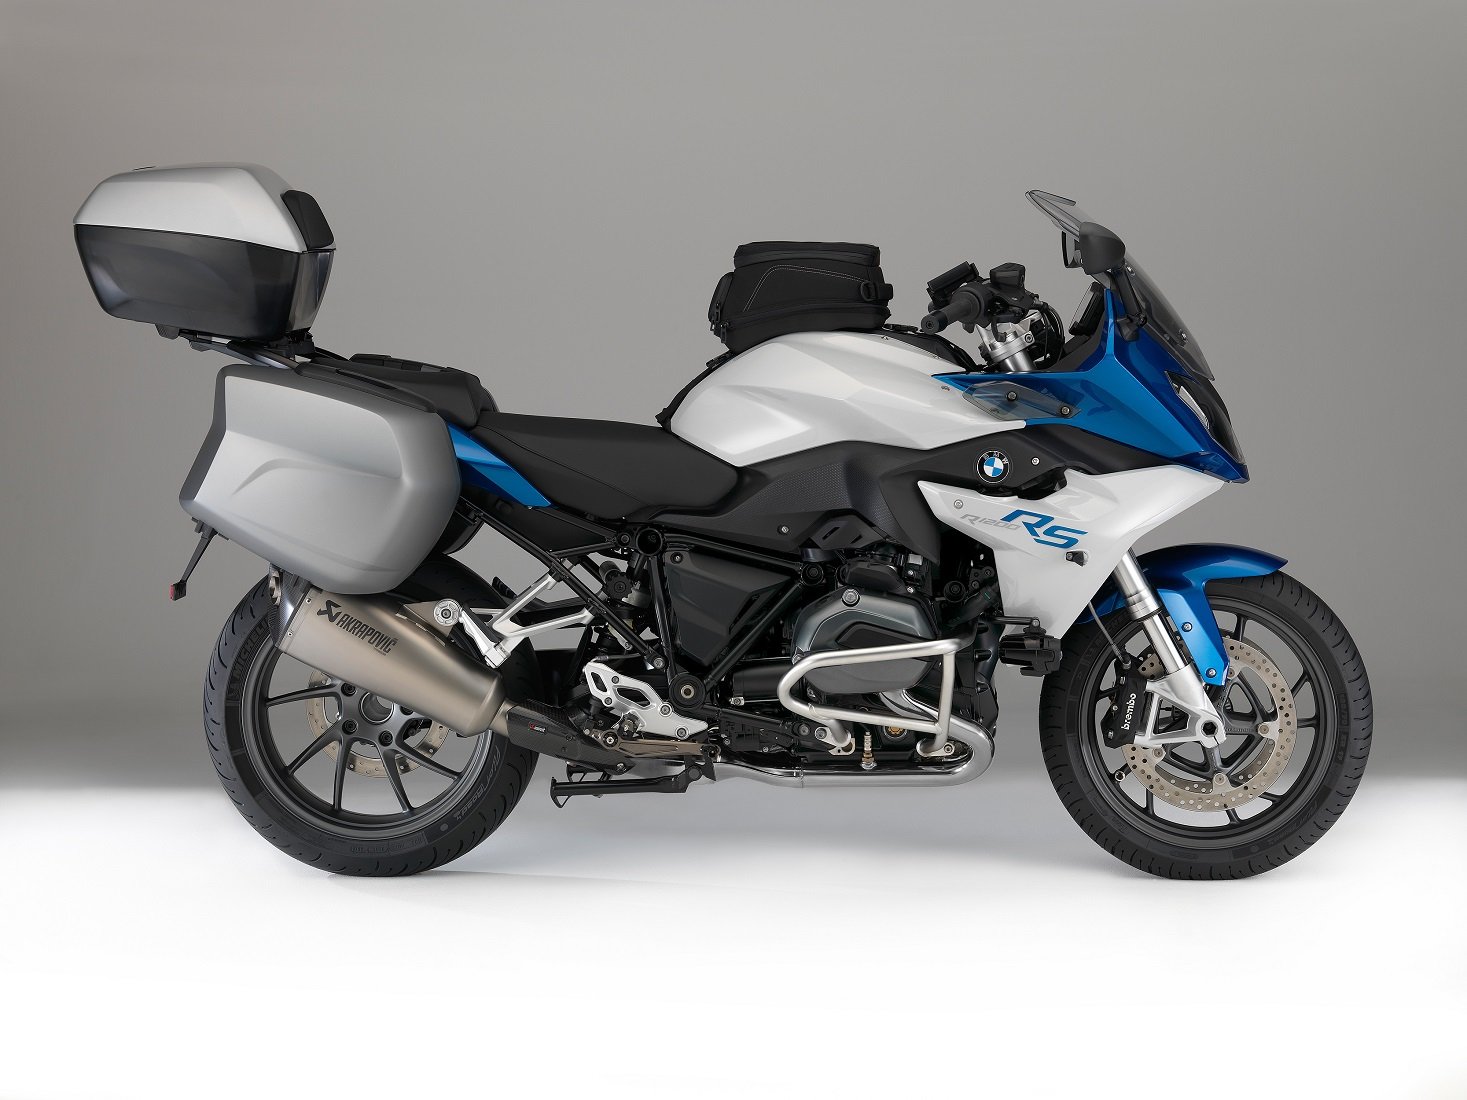 bmw, R 1200 rs, Motorcycles, 2015 Wallpaper